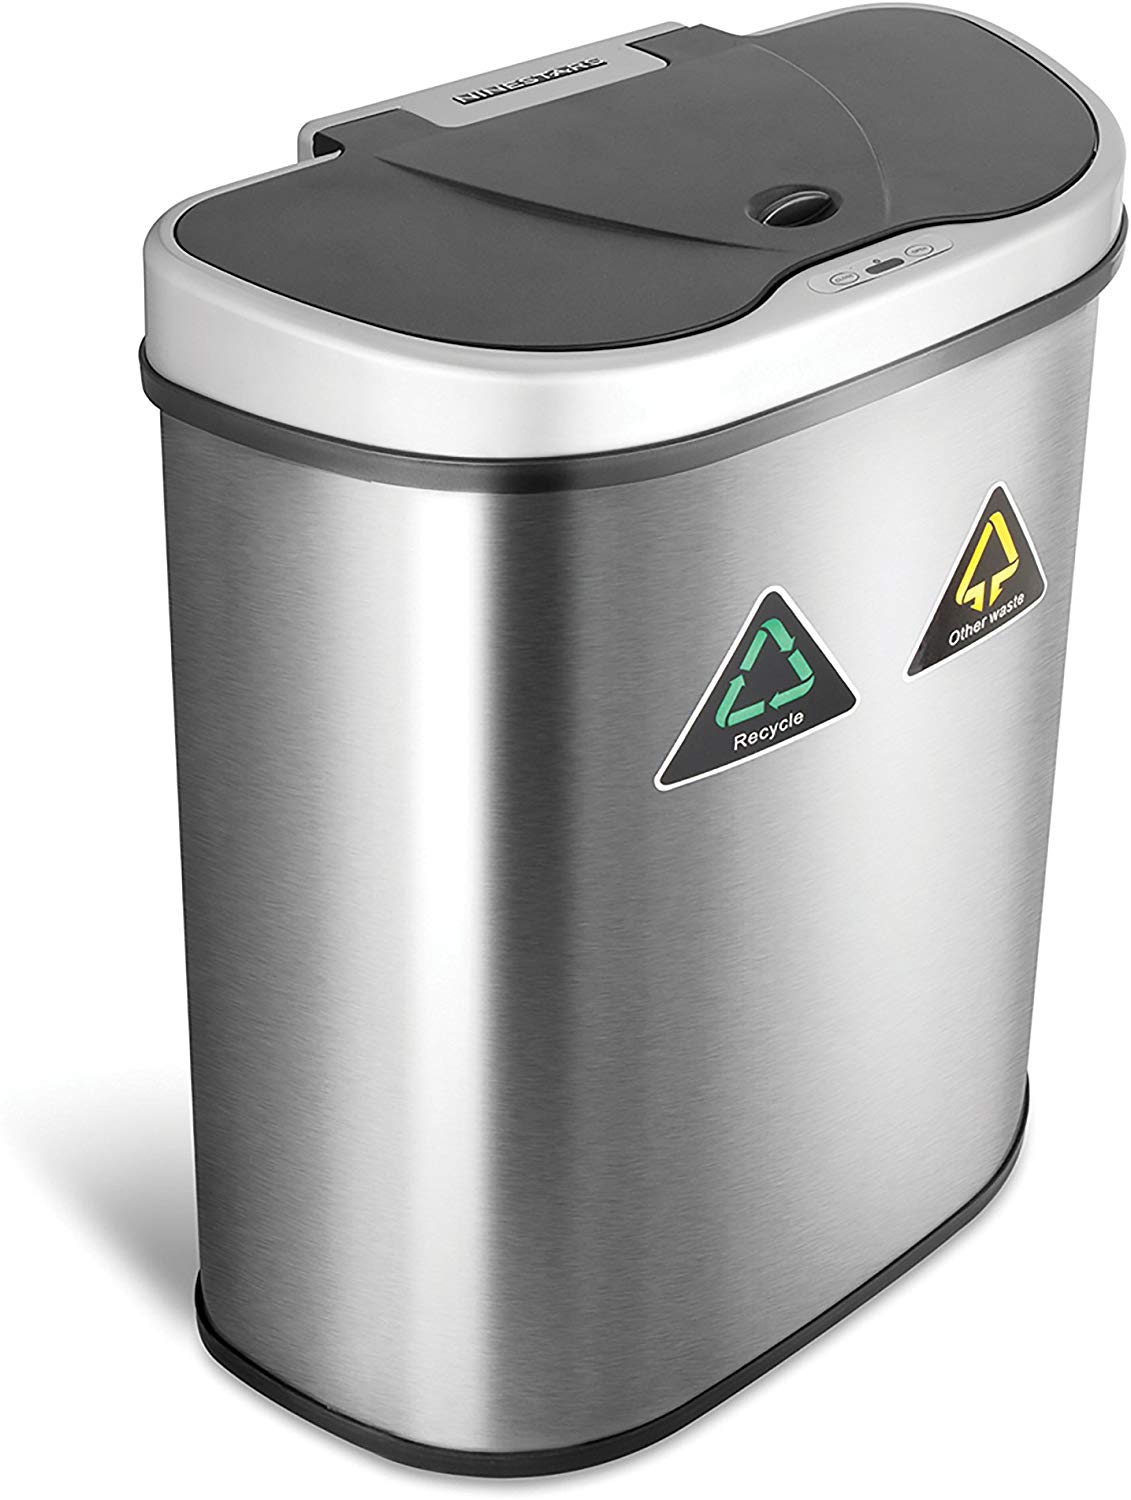 NINESTARS Automatic Touchless Trash Can, 18-Gallon